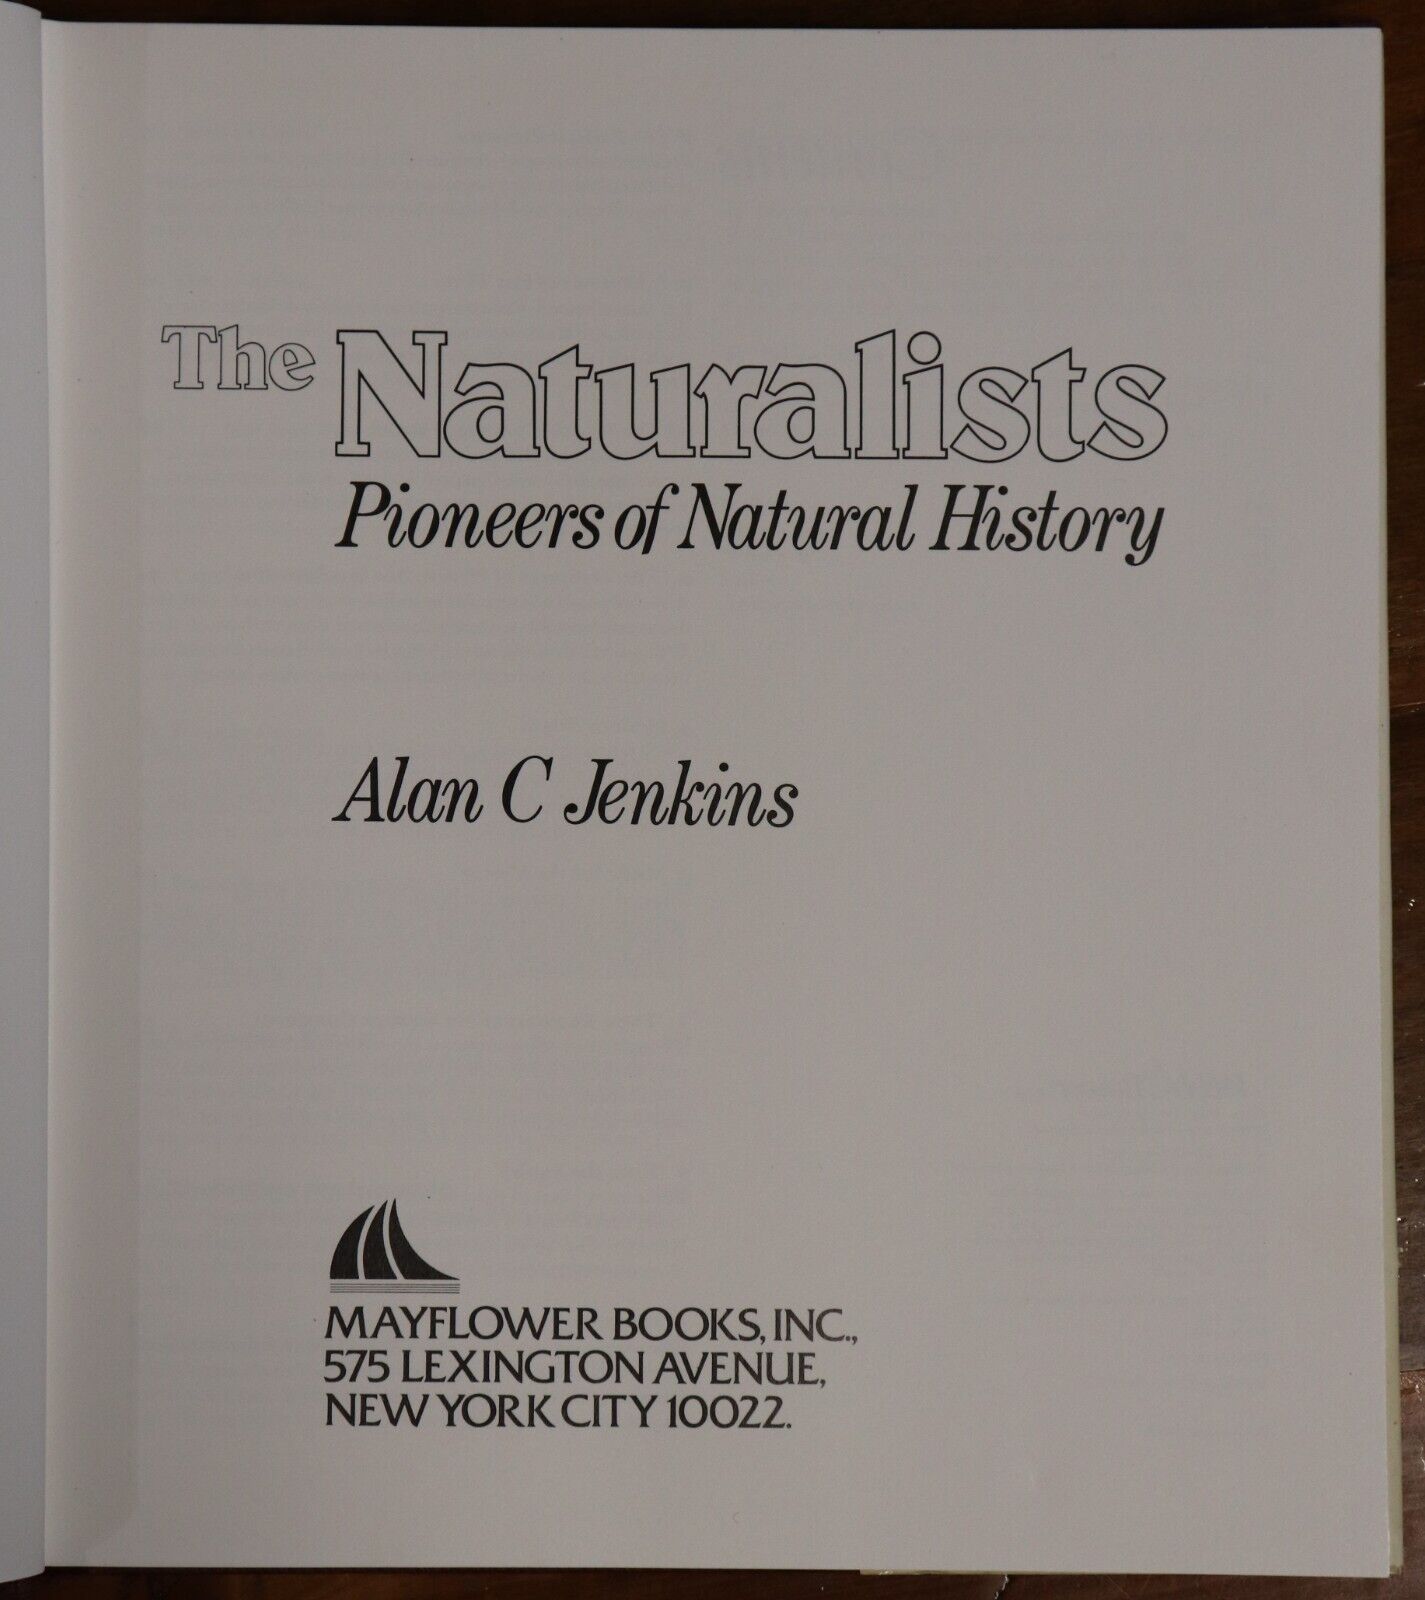 The Naturalists by AC Jenkins - 1978 - Darwin Science & Nature Book